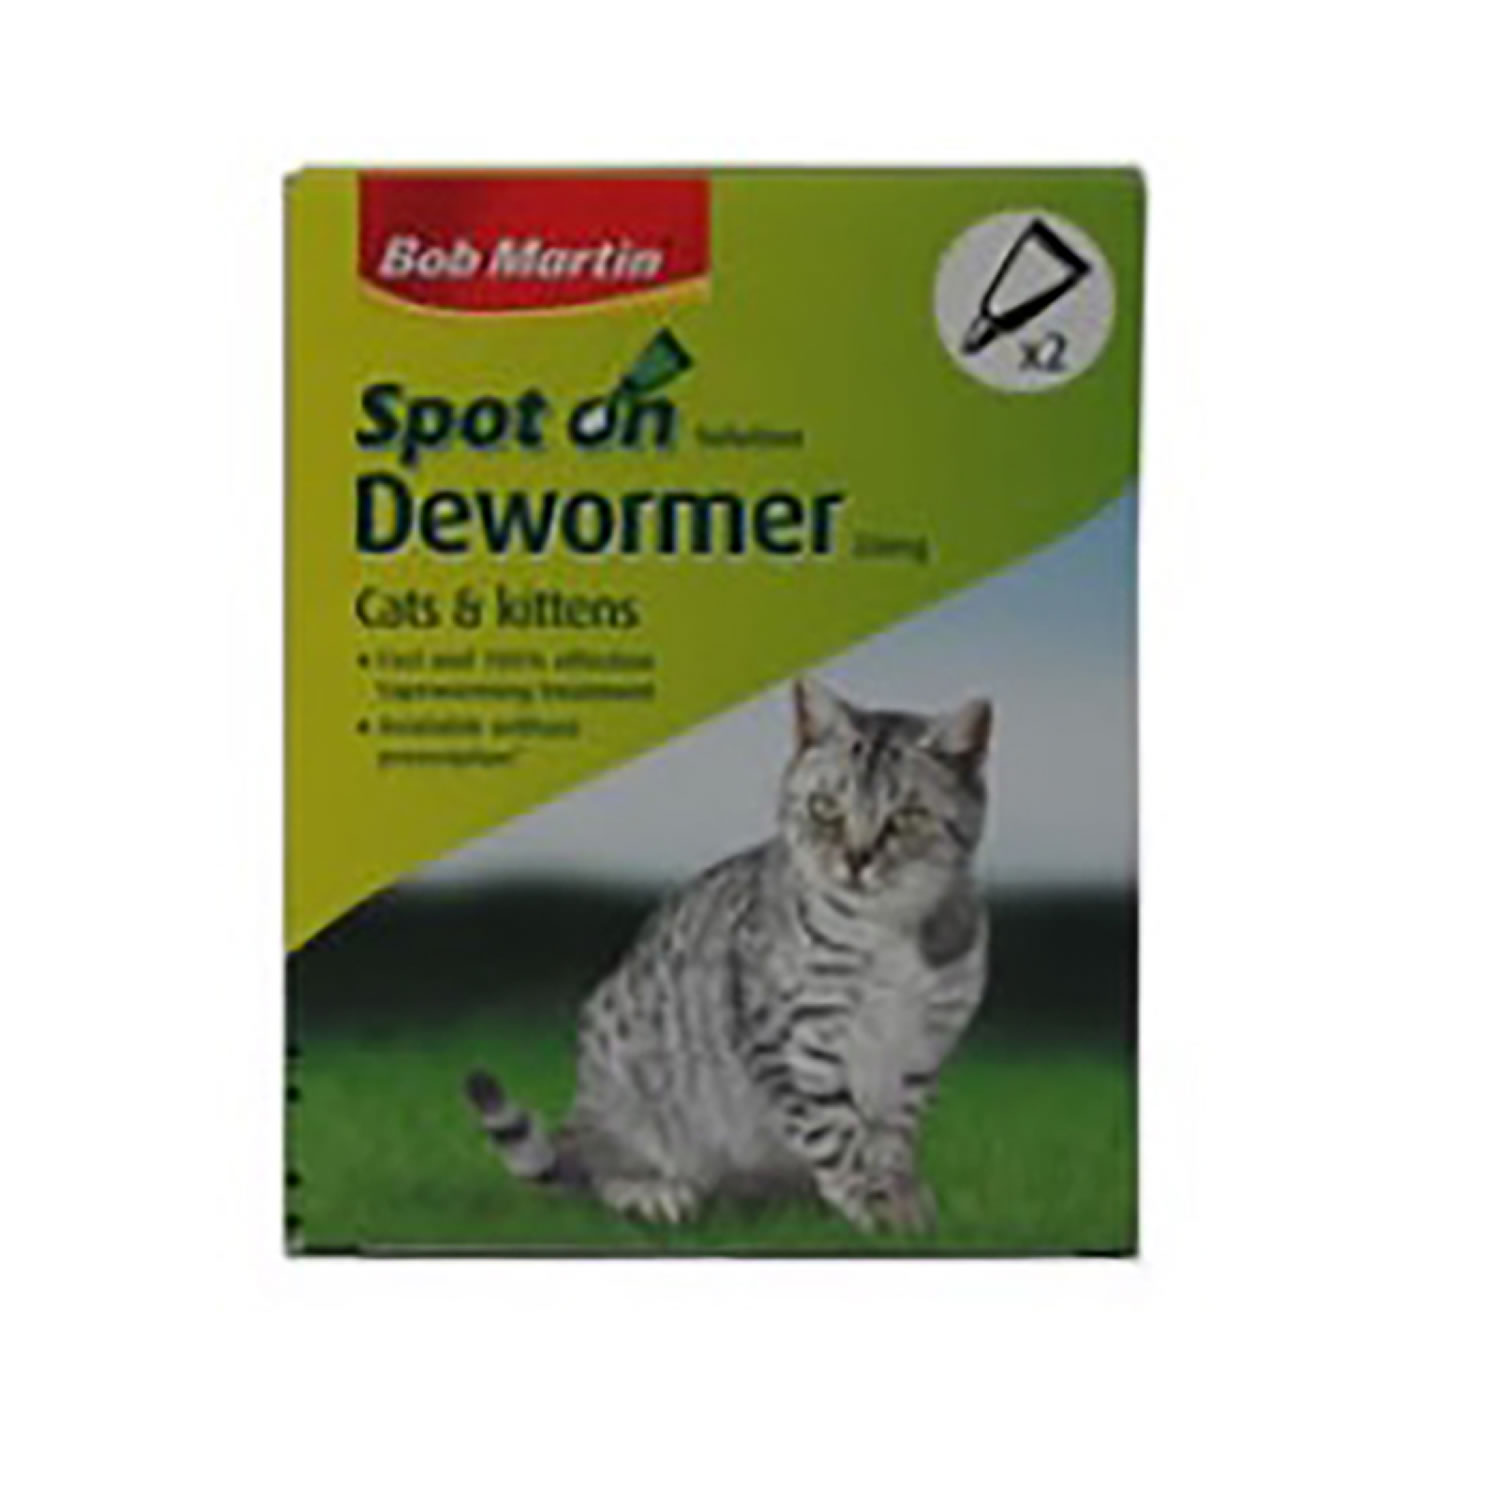 BOB MARTIN CLEAR SPOT ON WORMER FOR CATS & KITTENS BOB MARTIN CLEAR SPOT ON WORMER FOR CATS & KITTENS 2 PIPETTES  2 PIPETTES